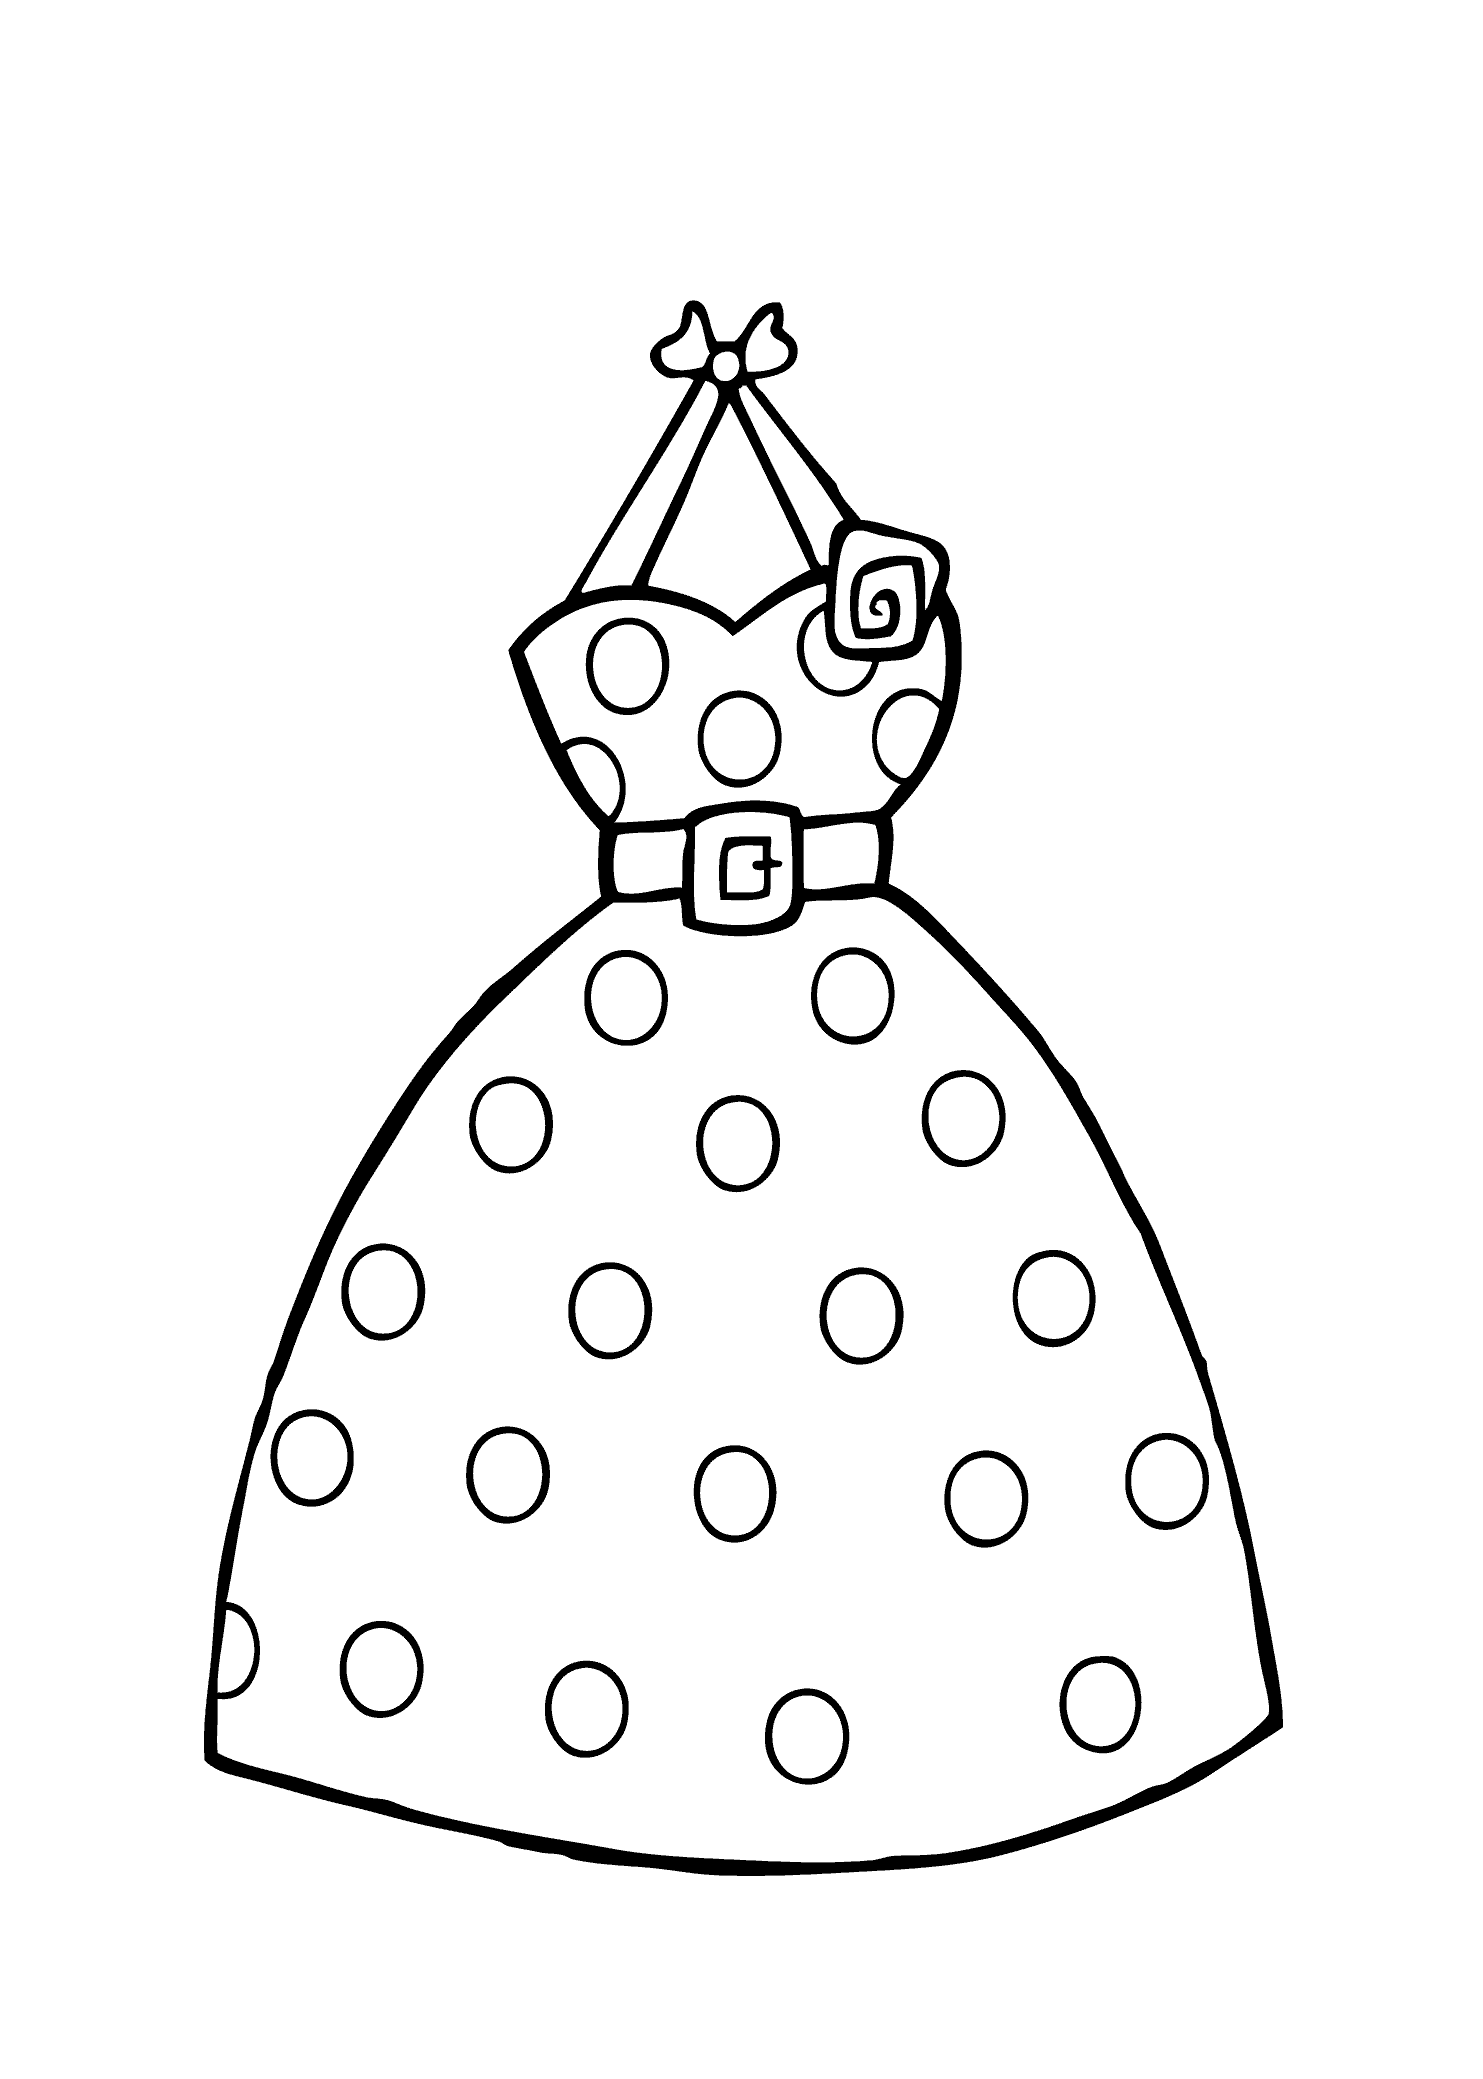 coloring page dress dress coloring pages to download and print for free dress coloring page 